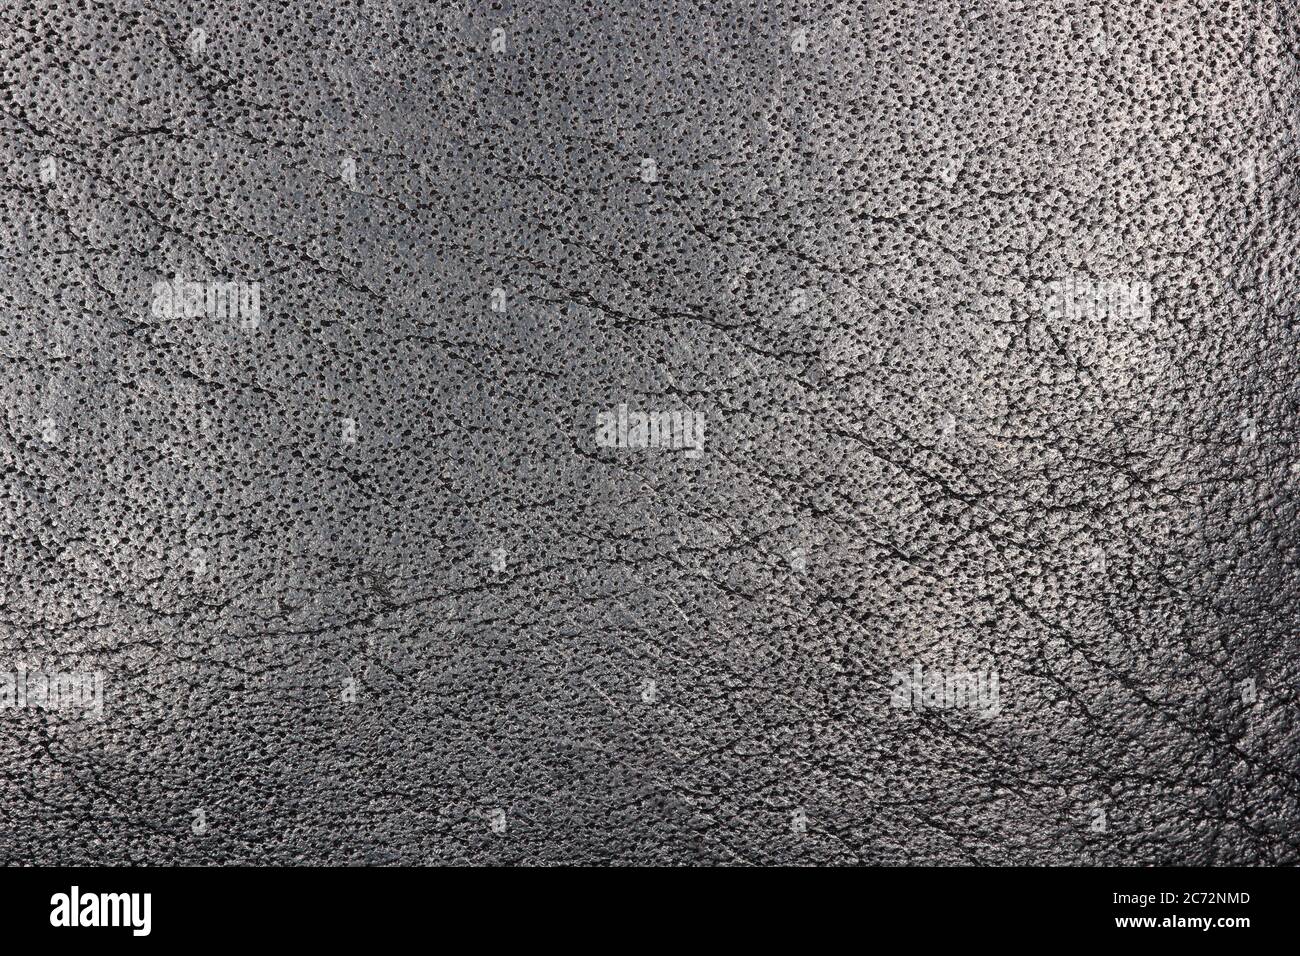 Soft Black Leather Surface Texture Stock Photo